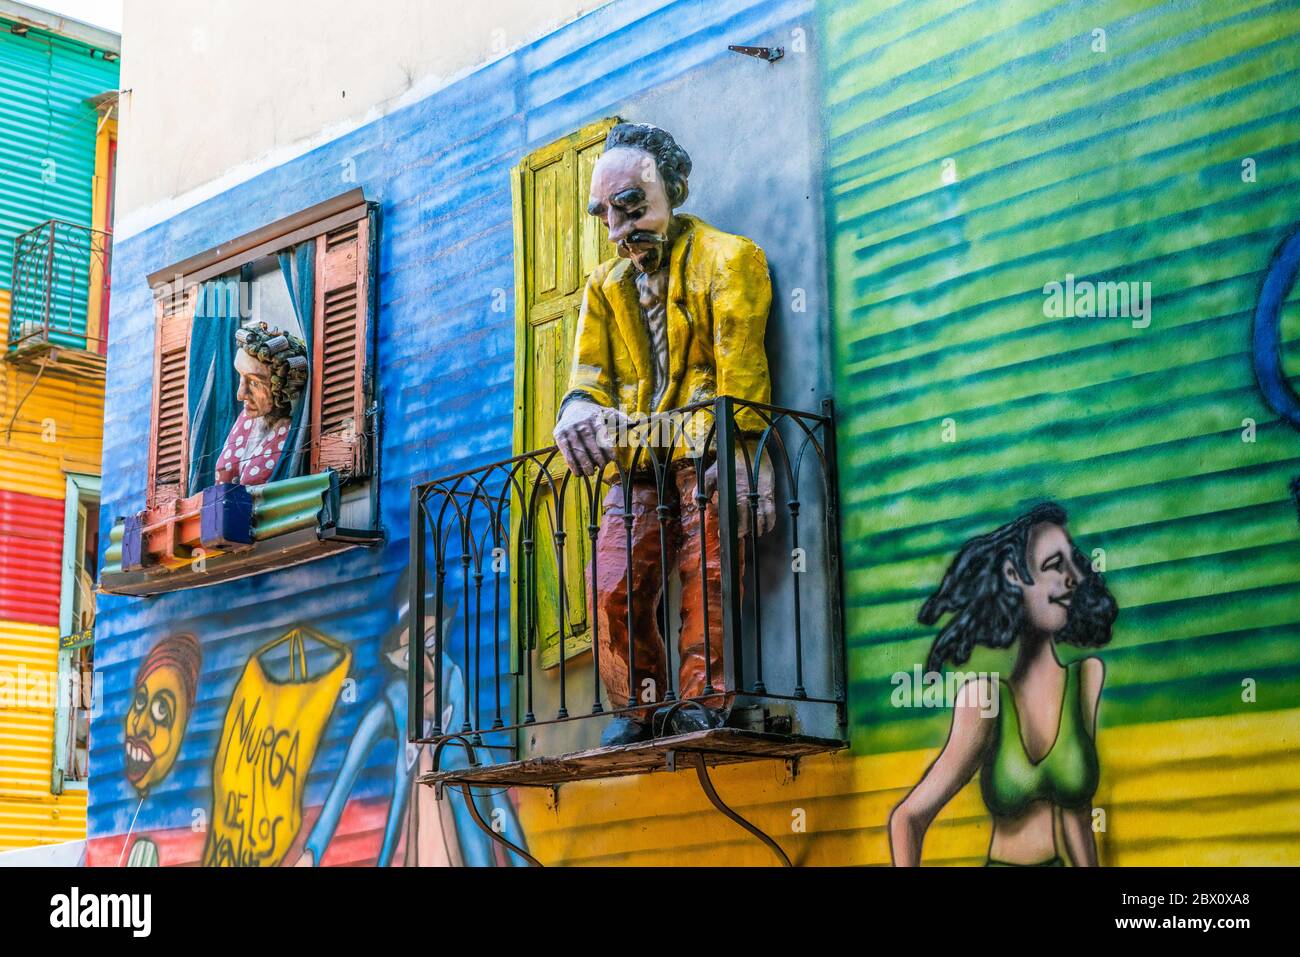 Life-size Human Dolls Looking into Street in La Boca, Buenos Aires,  Argentina Editorial Stock Image - Image of balcony, plata: 201192689